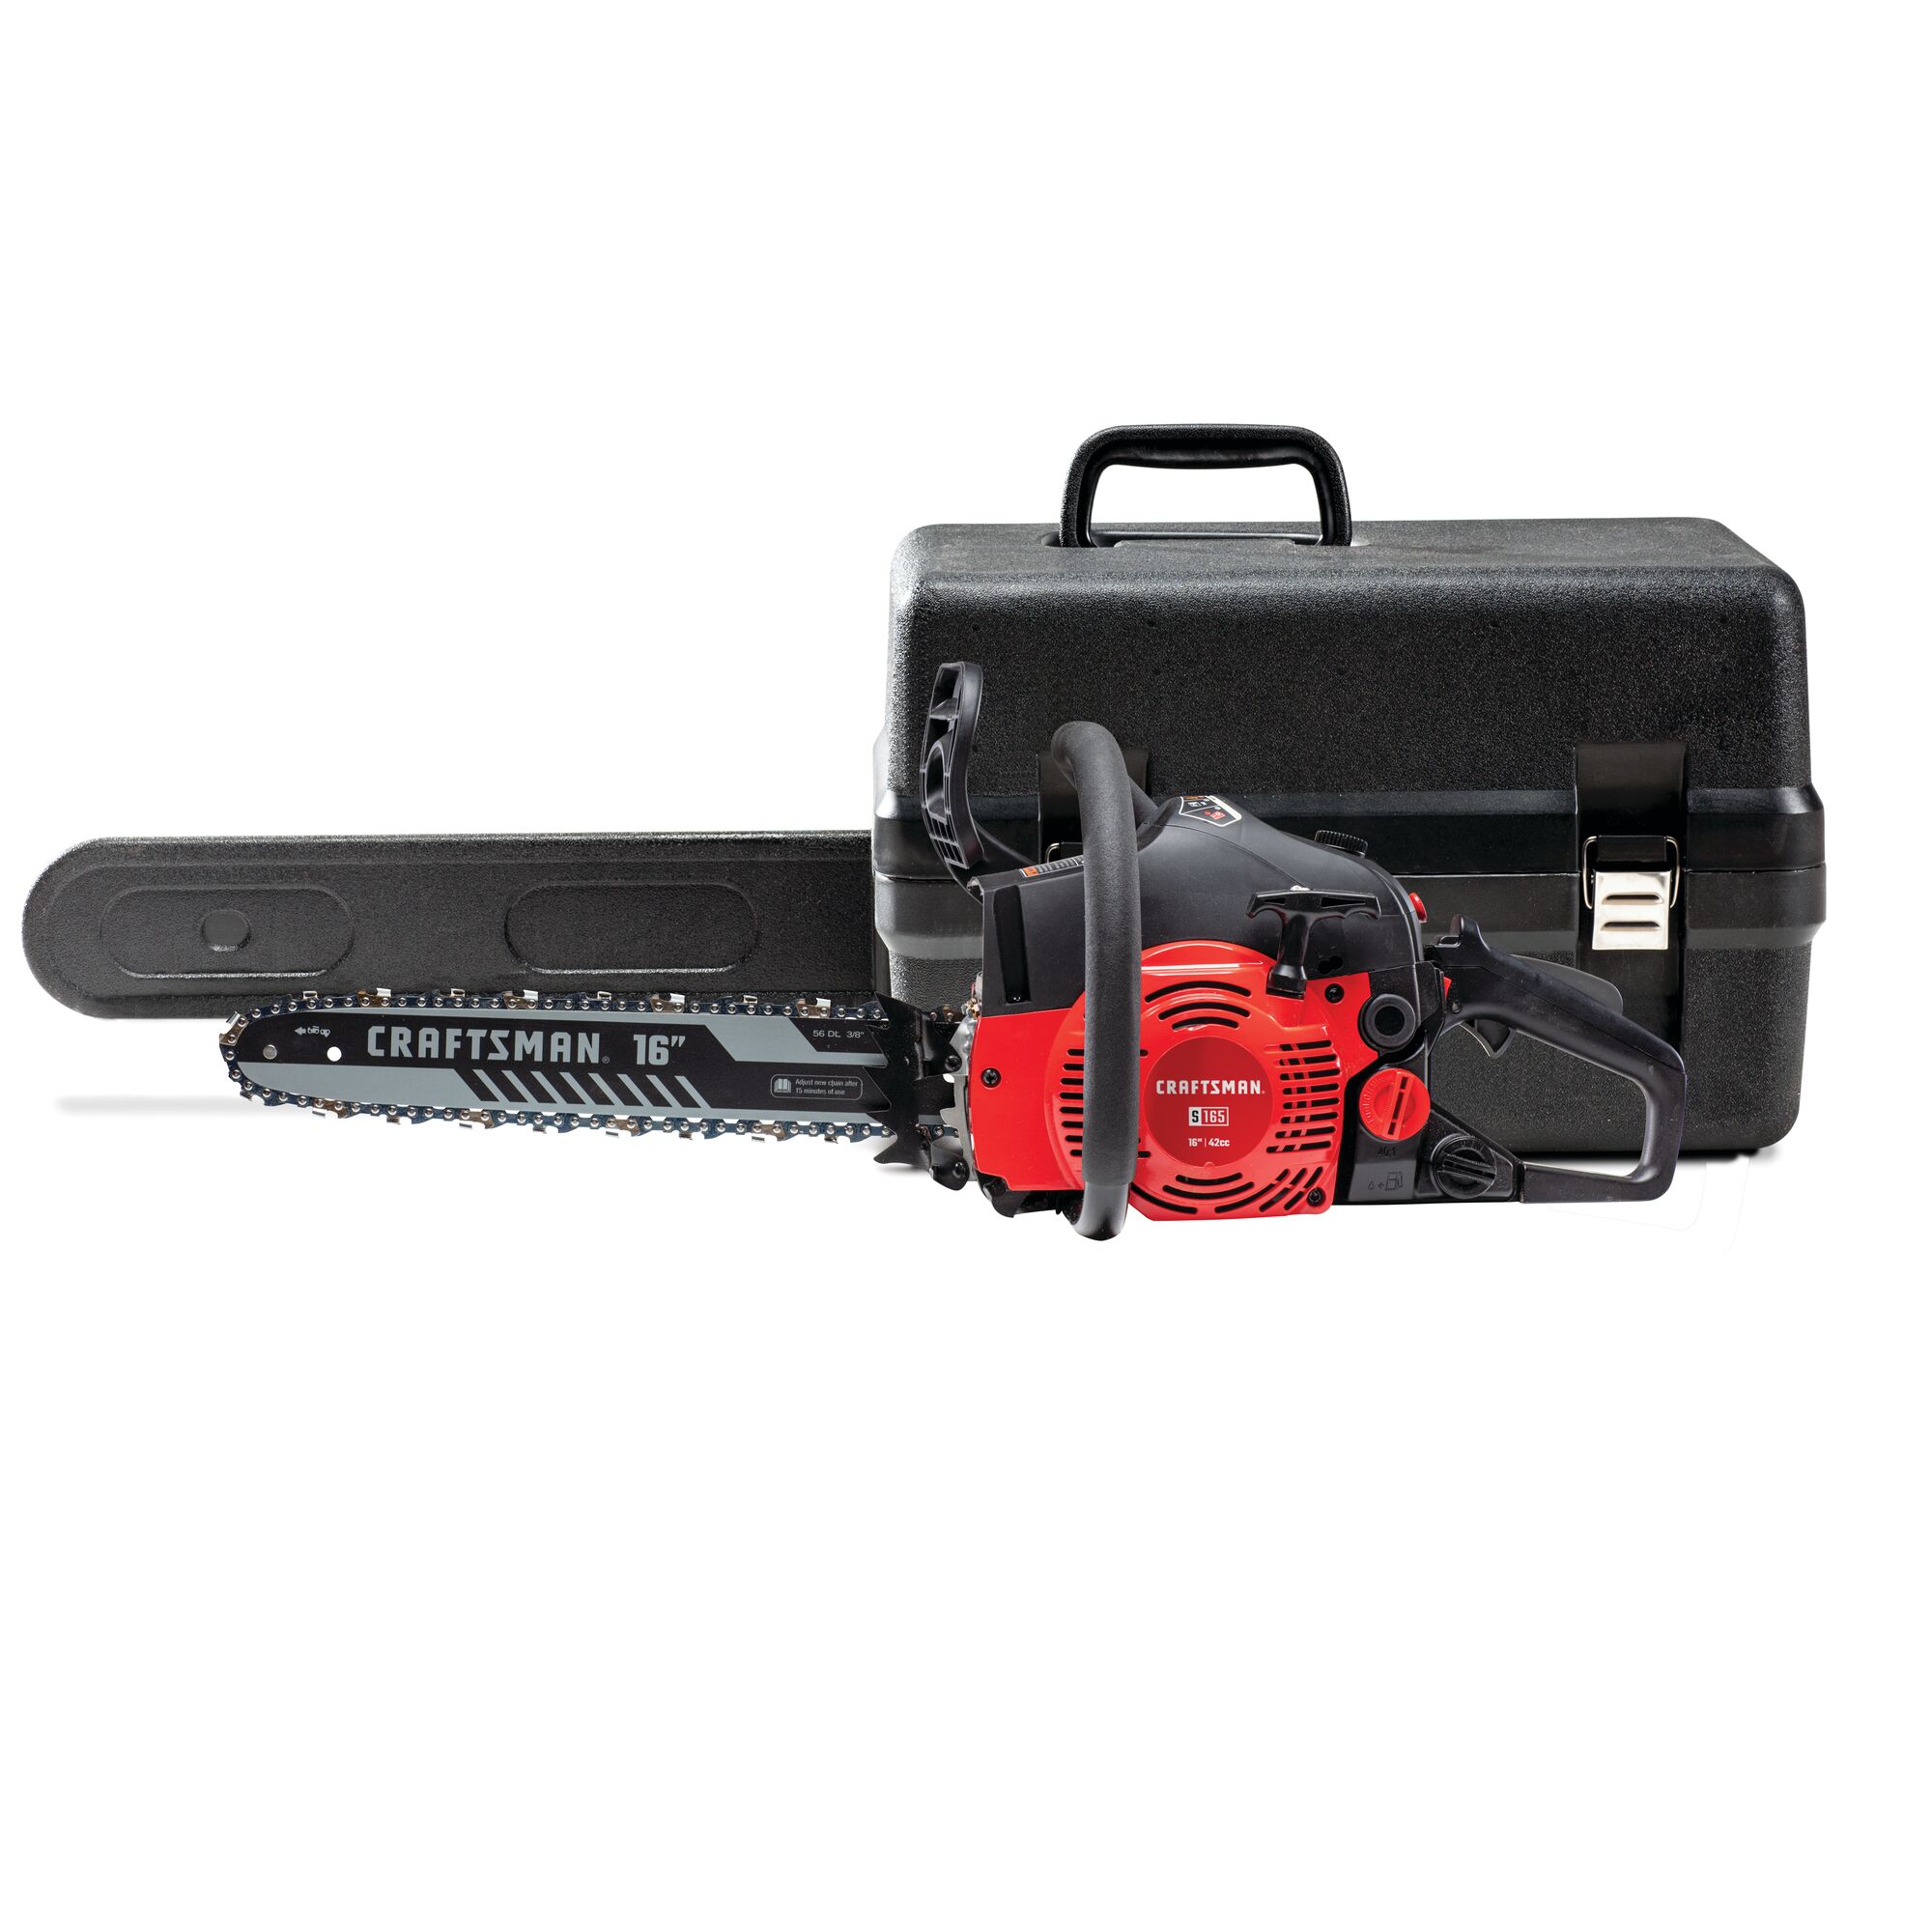 CRAFTSMAN S165 42cc 2-Cycle 16 in. Gas Chainsaw on white background